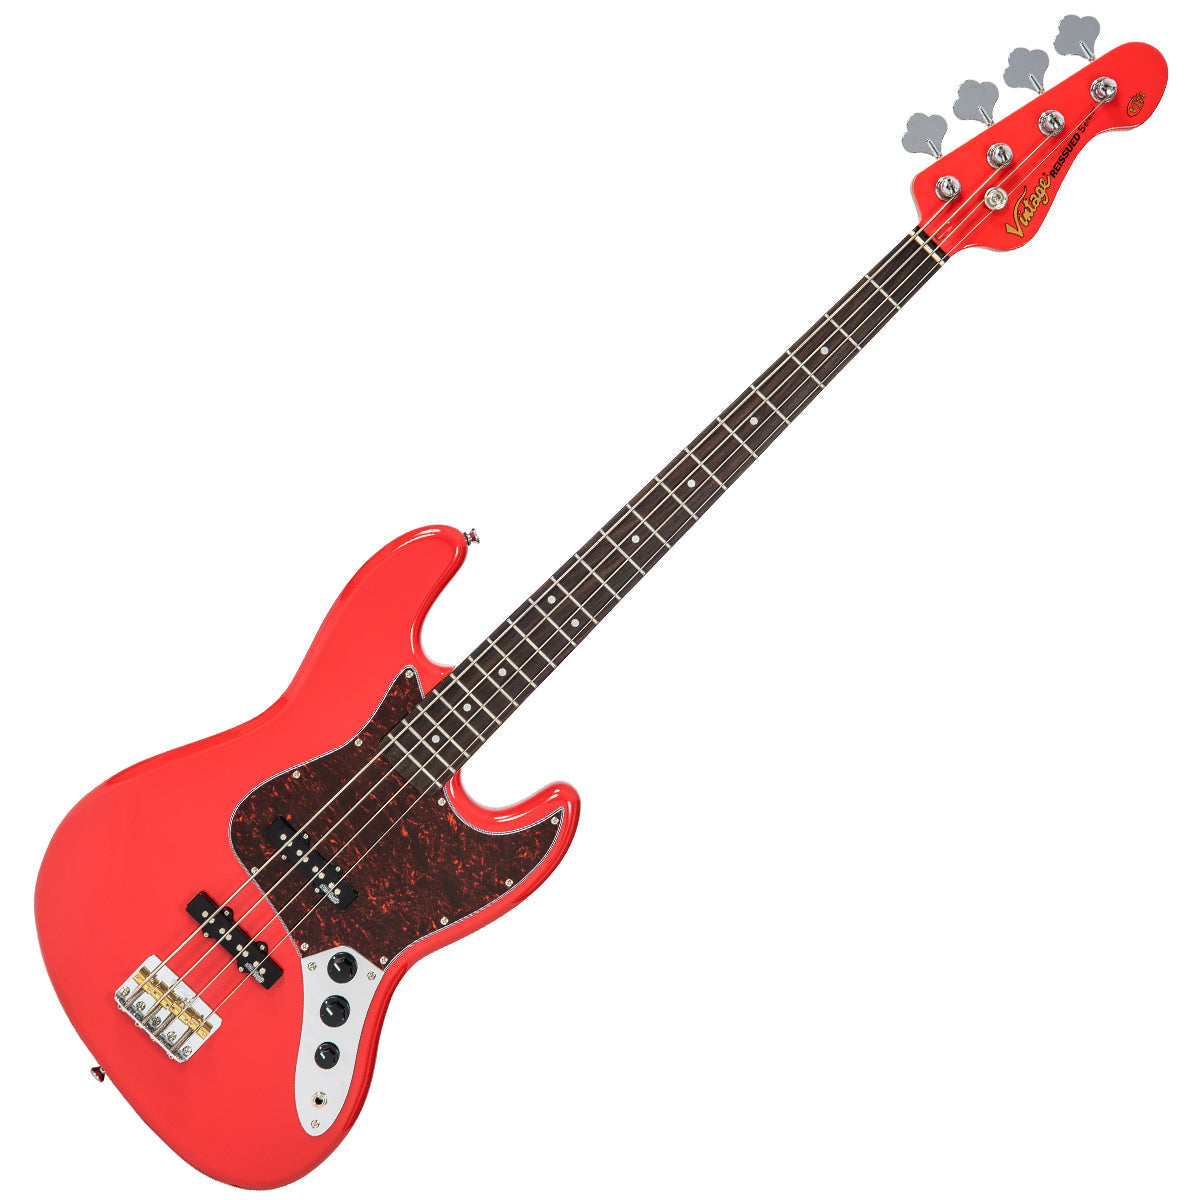 Vintage VJ74 ReIssued Bass ~ Firenza Red, Bass Guitar for sale at Richards Guitars.